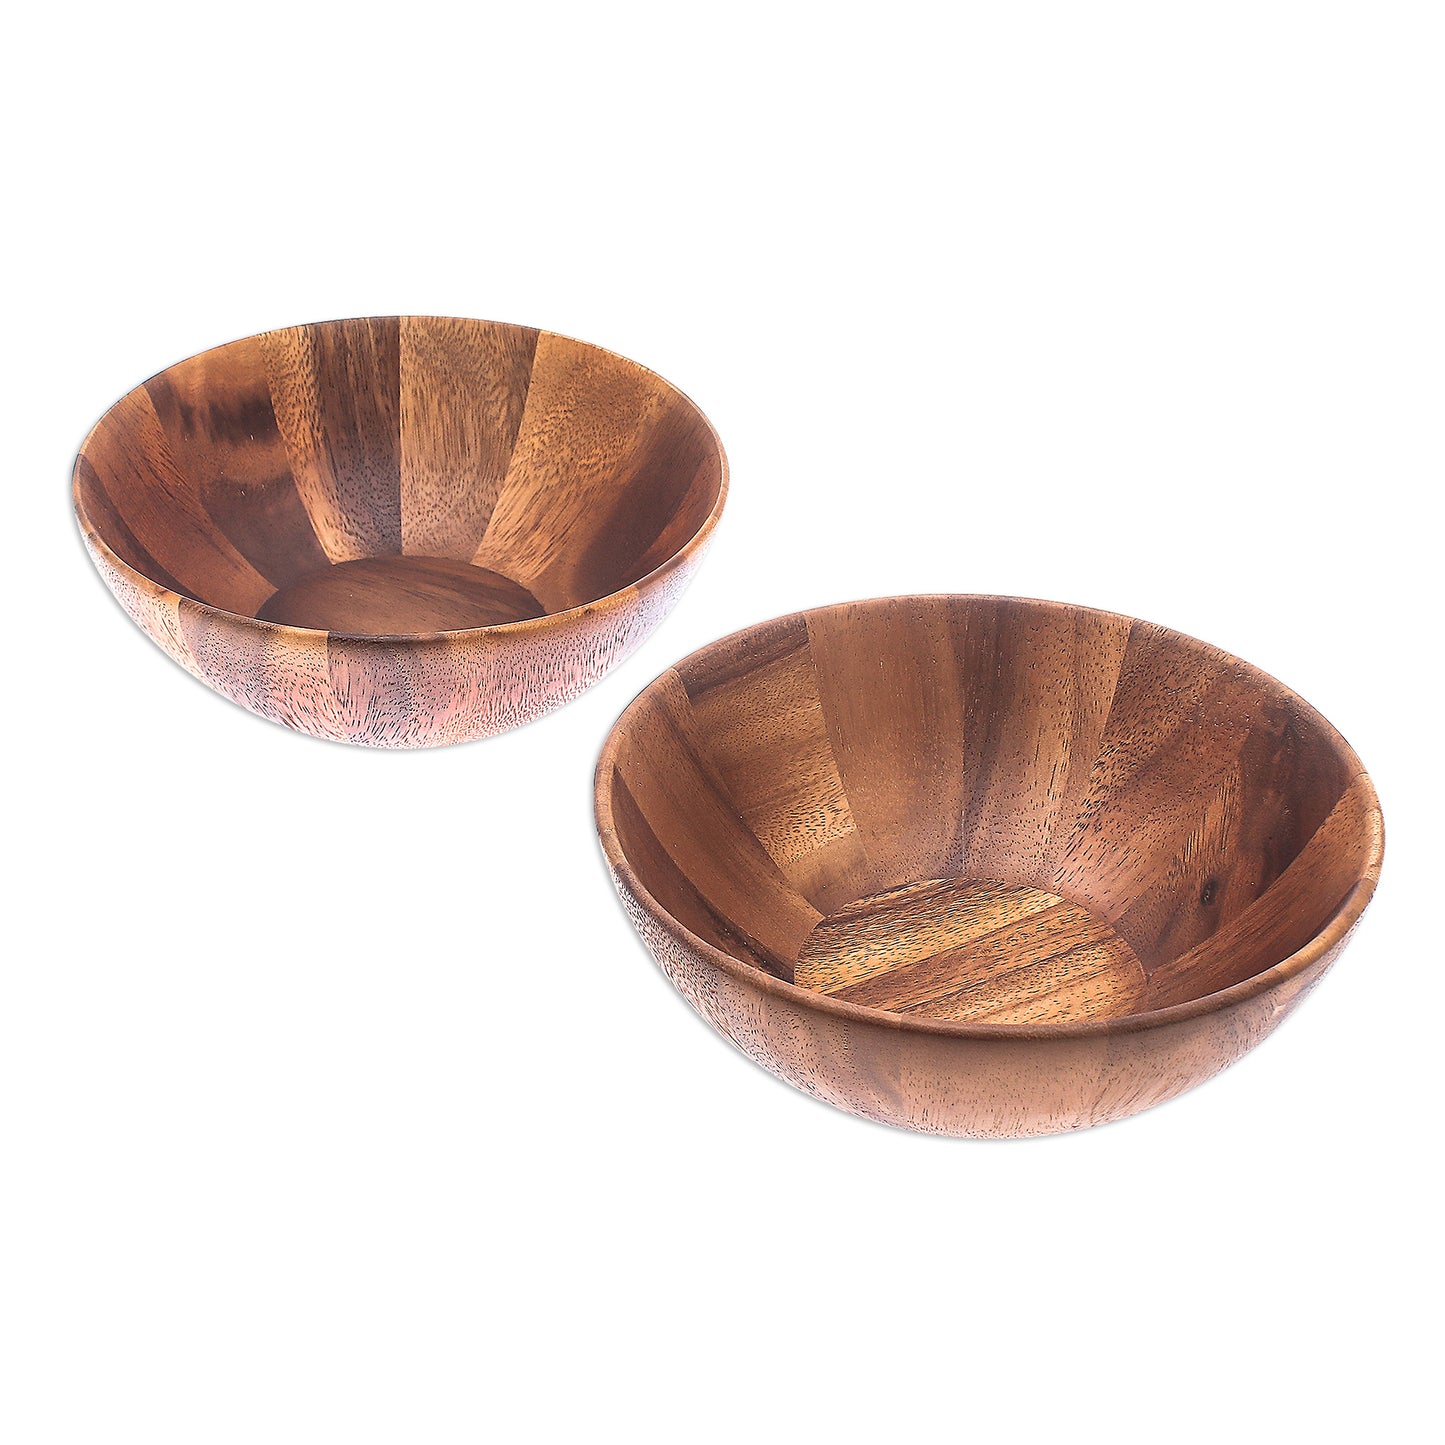 Exquisite Meal Handmade Raintree Wood Bowls from Thailand (Pair)